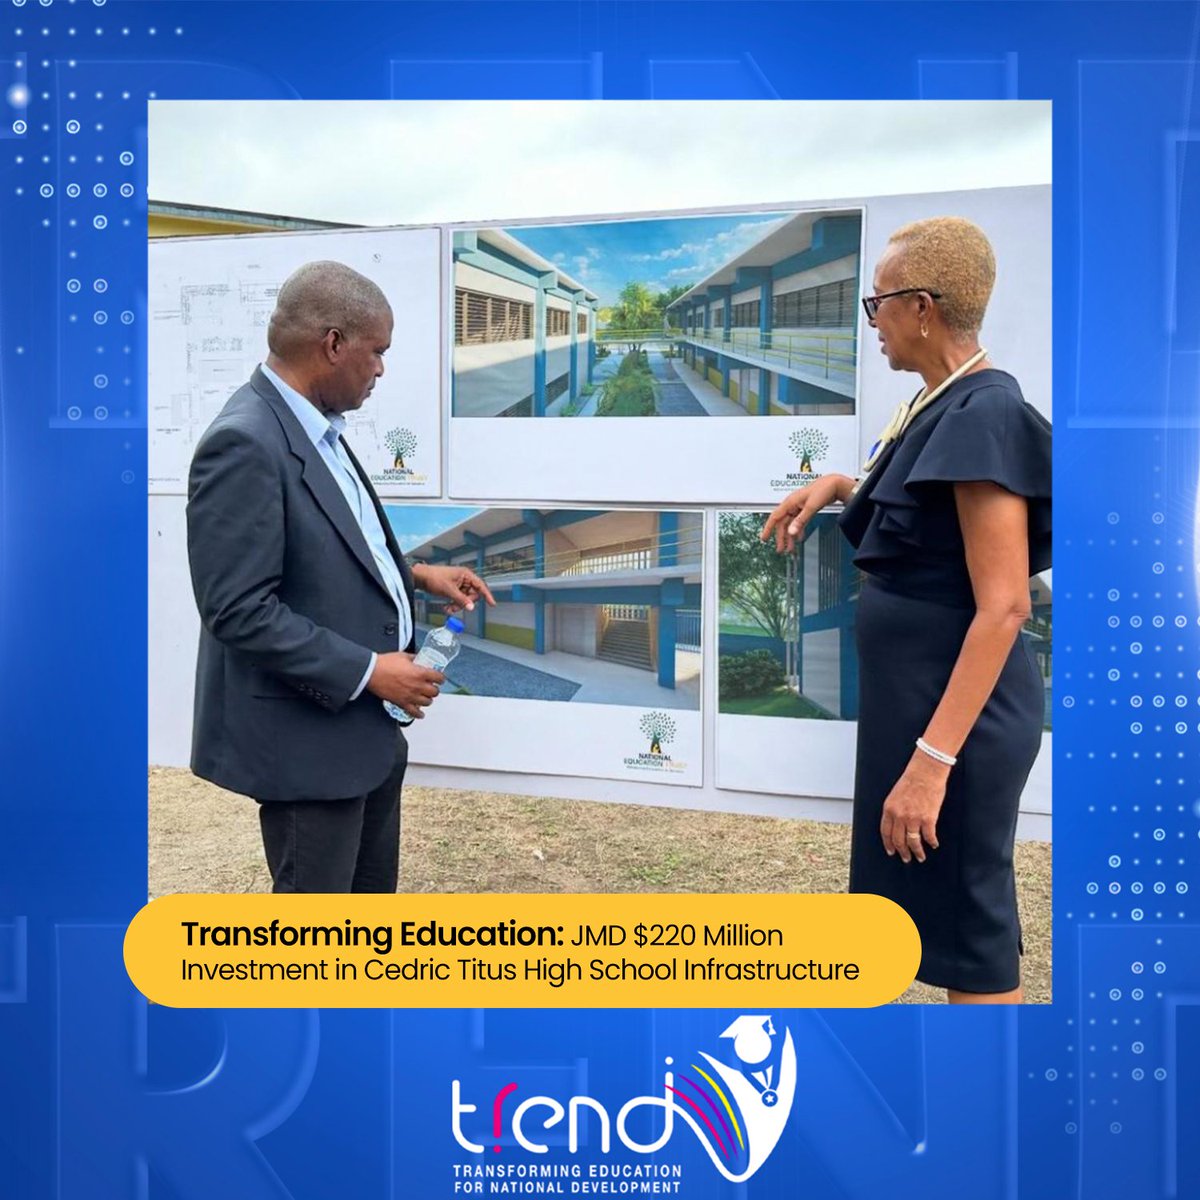 The Ministry of Education and Youth has allotted $220 million towards improving school infrastructure at Cedric Titus High School in Trelawny to ensure fair access and provide internationally standardized resources for students. #MoEY #TREND #TRENDBrighterJa